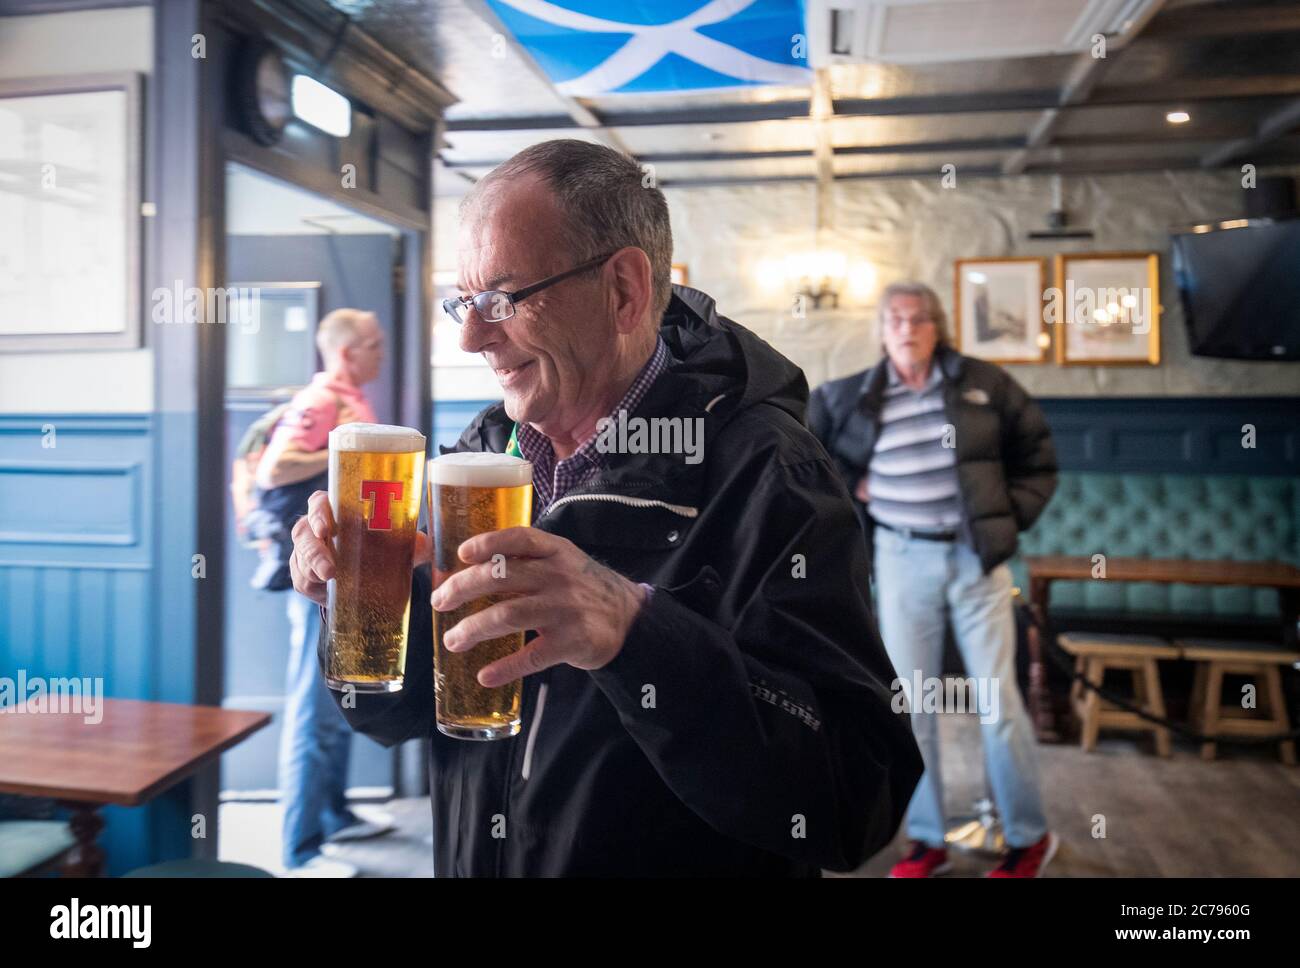 George McDonald, from Clemiston, is the first customer to be served at The Scotsman's Lounge pub in Edinburgh as pubs, bars and restaurants across Scotland have opened indoor areas for the first time since March after the lifting of further coronavirus lockdown restrictions. Stock Photo